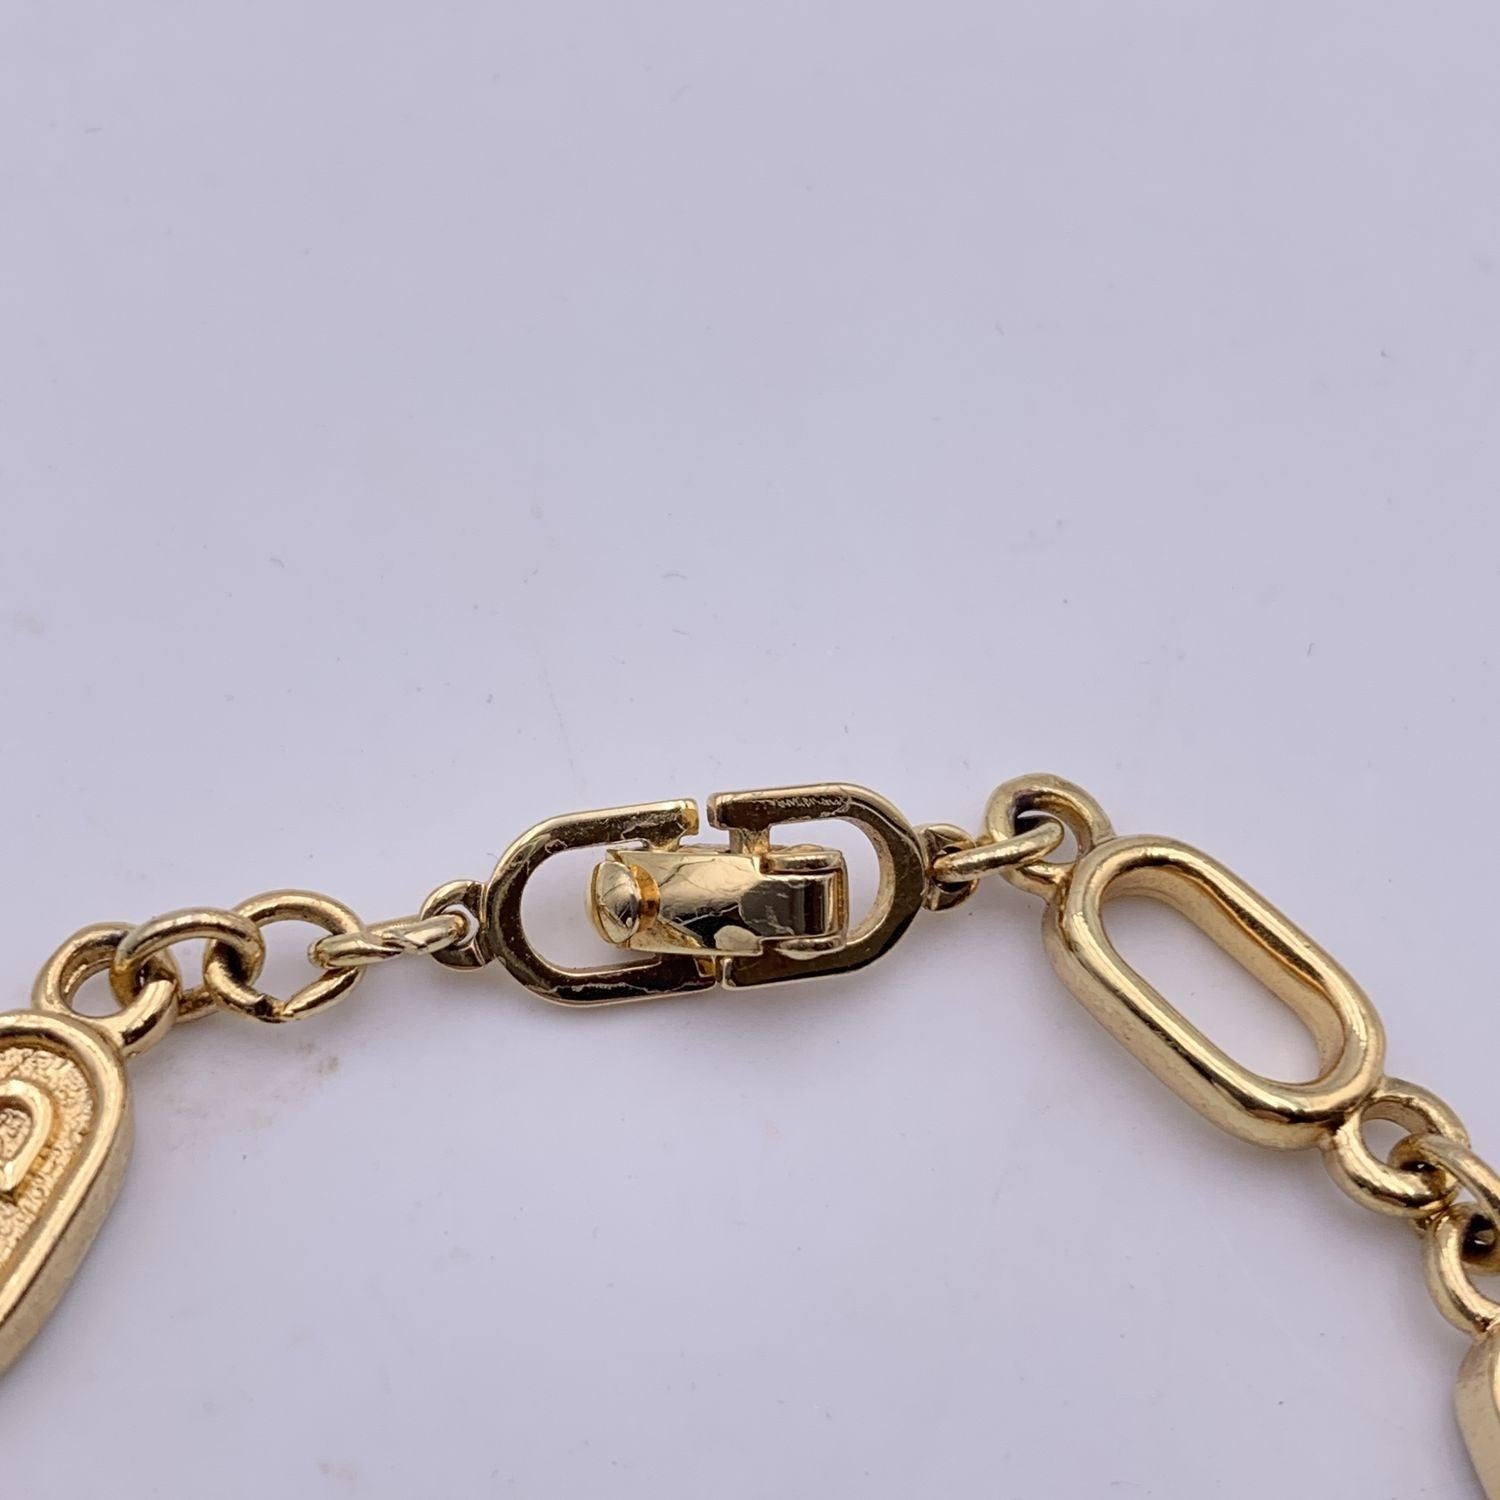 Vintage gold metal chain bracelet by CHRISTIAN DIOR. Oval chain links. Clasp closure. Total length: 7 inches - 17.8 cm. 'Chr. Dior' engraved on the closure. Condition A - EXCELLENT Gently used. Dior box included. Please check pictures carefully and